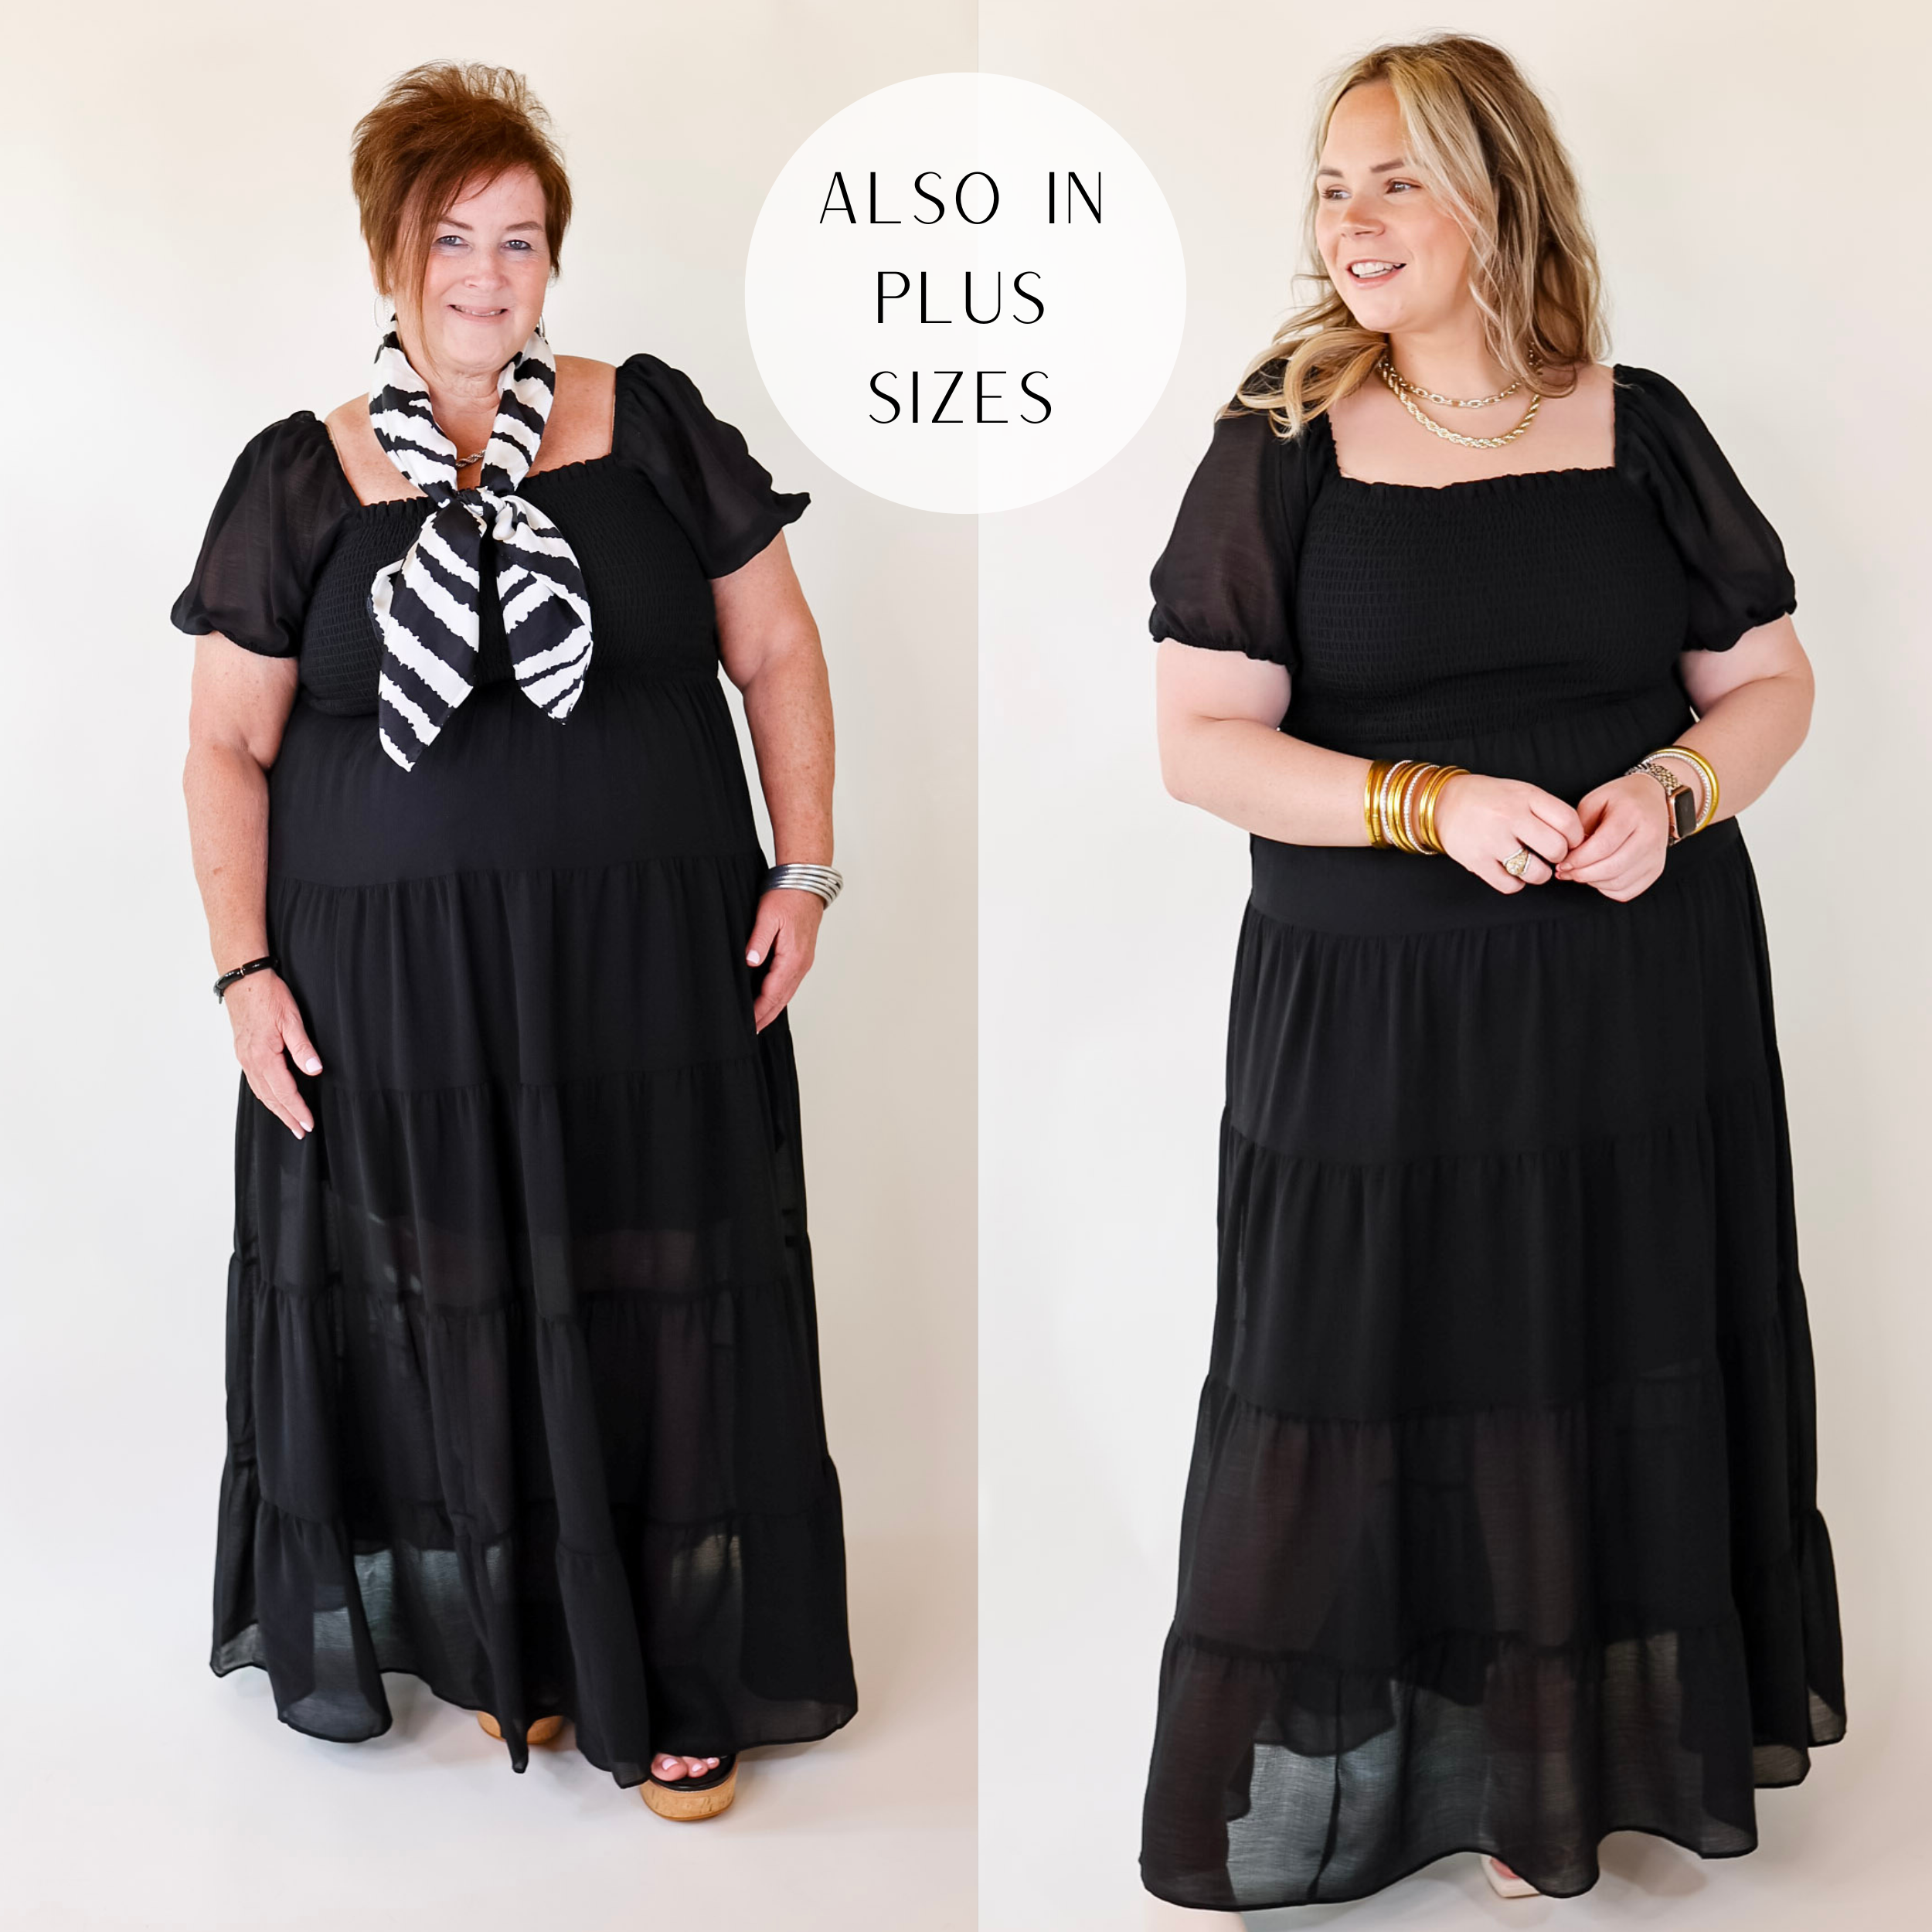 Models are wearing a long black short sleeve dress featuring a tiered skirt, puffed sleeves, and smocked bodice.